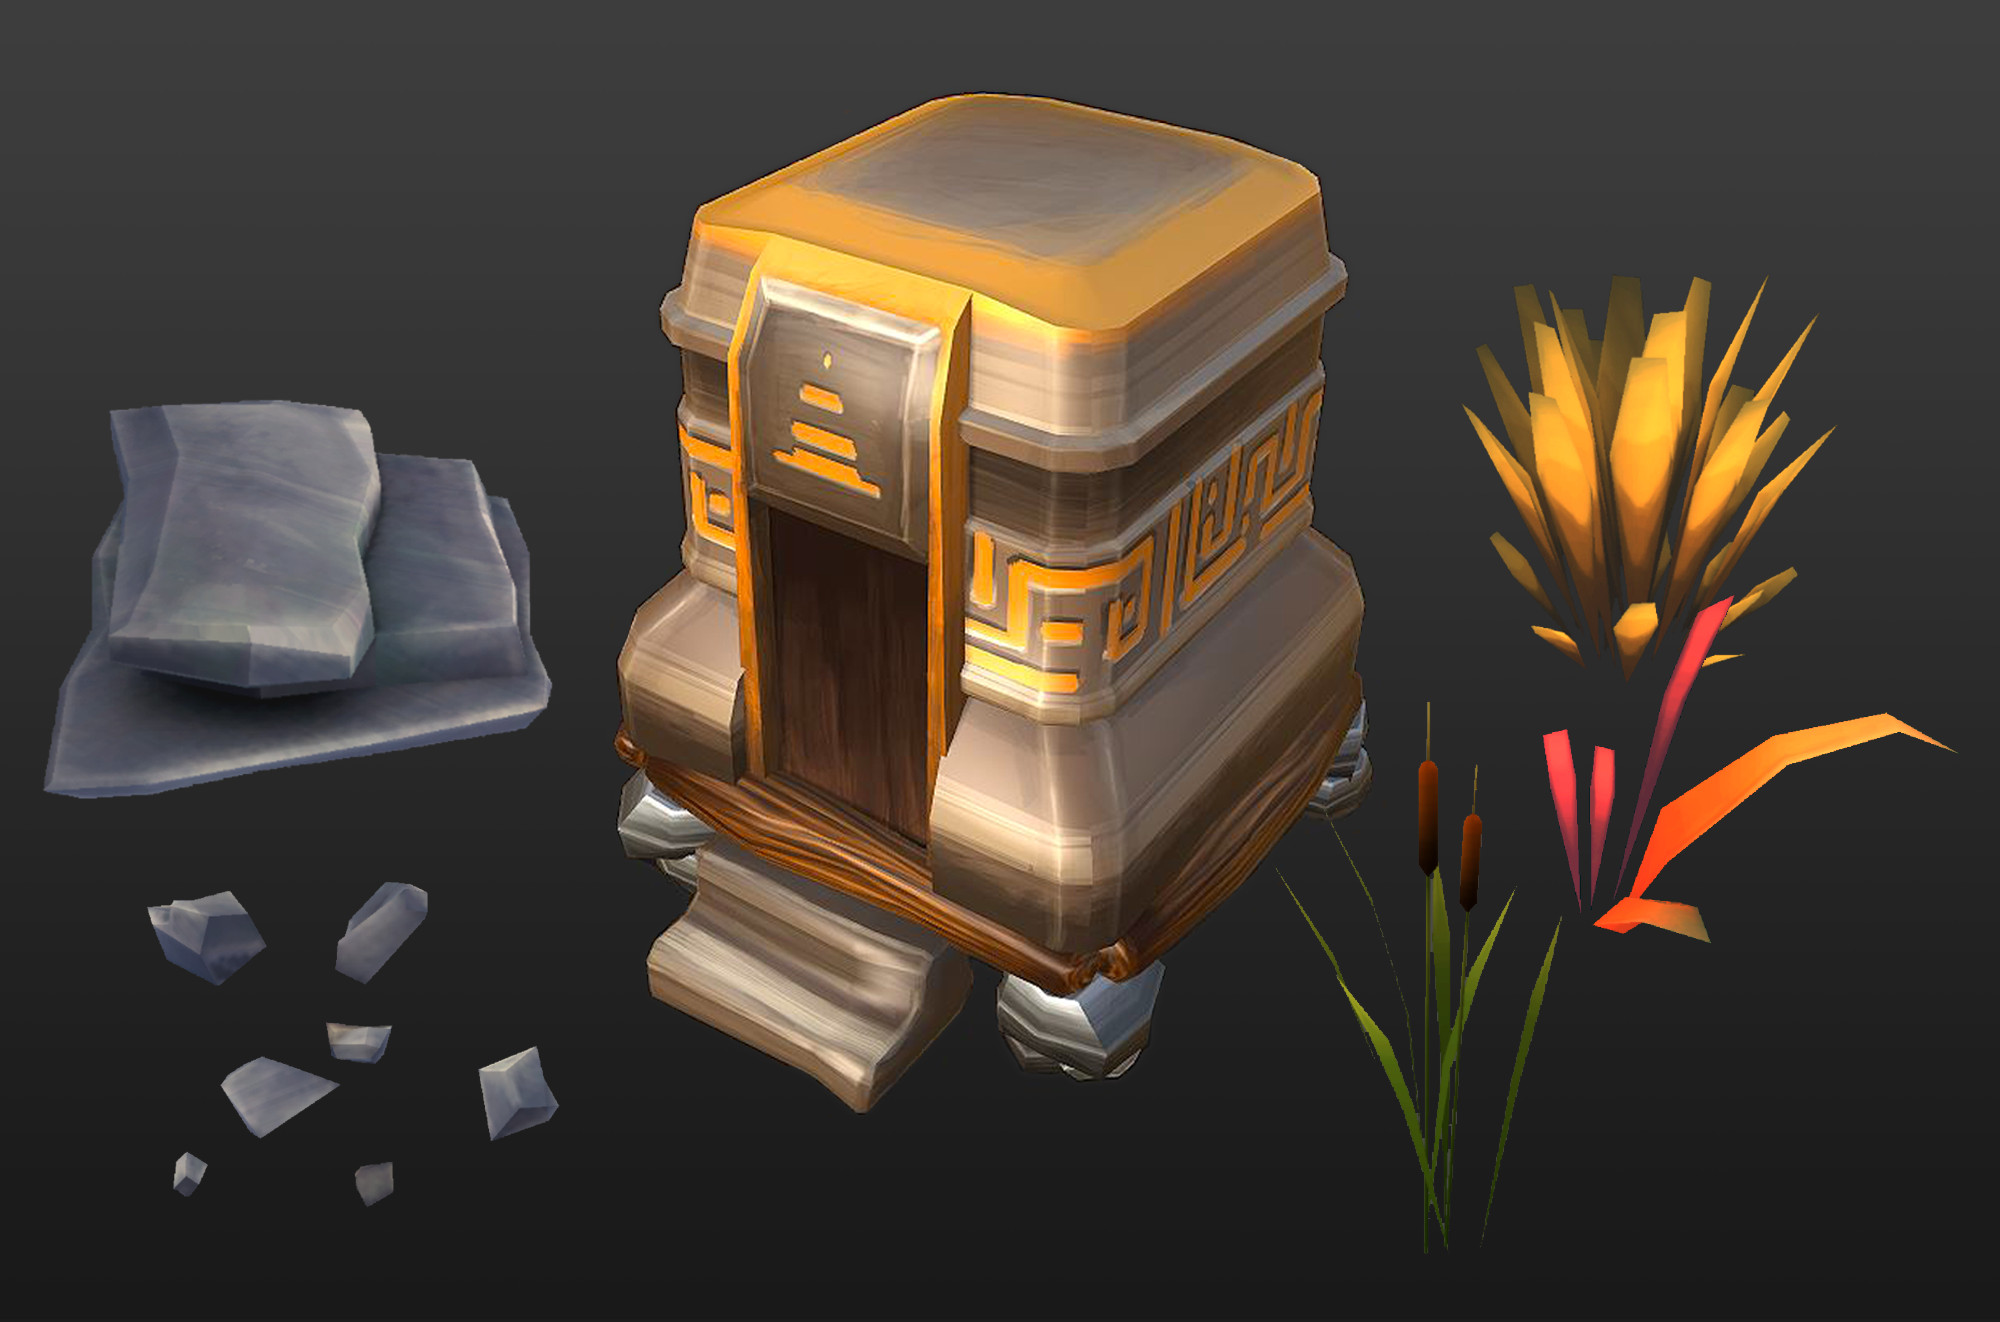 Creation, optimization and texturing of low-poly environment assets.